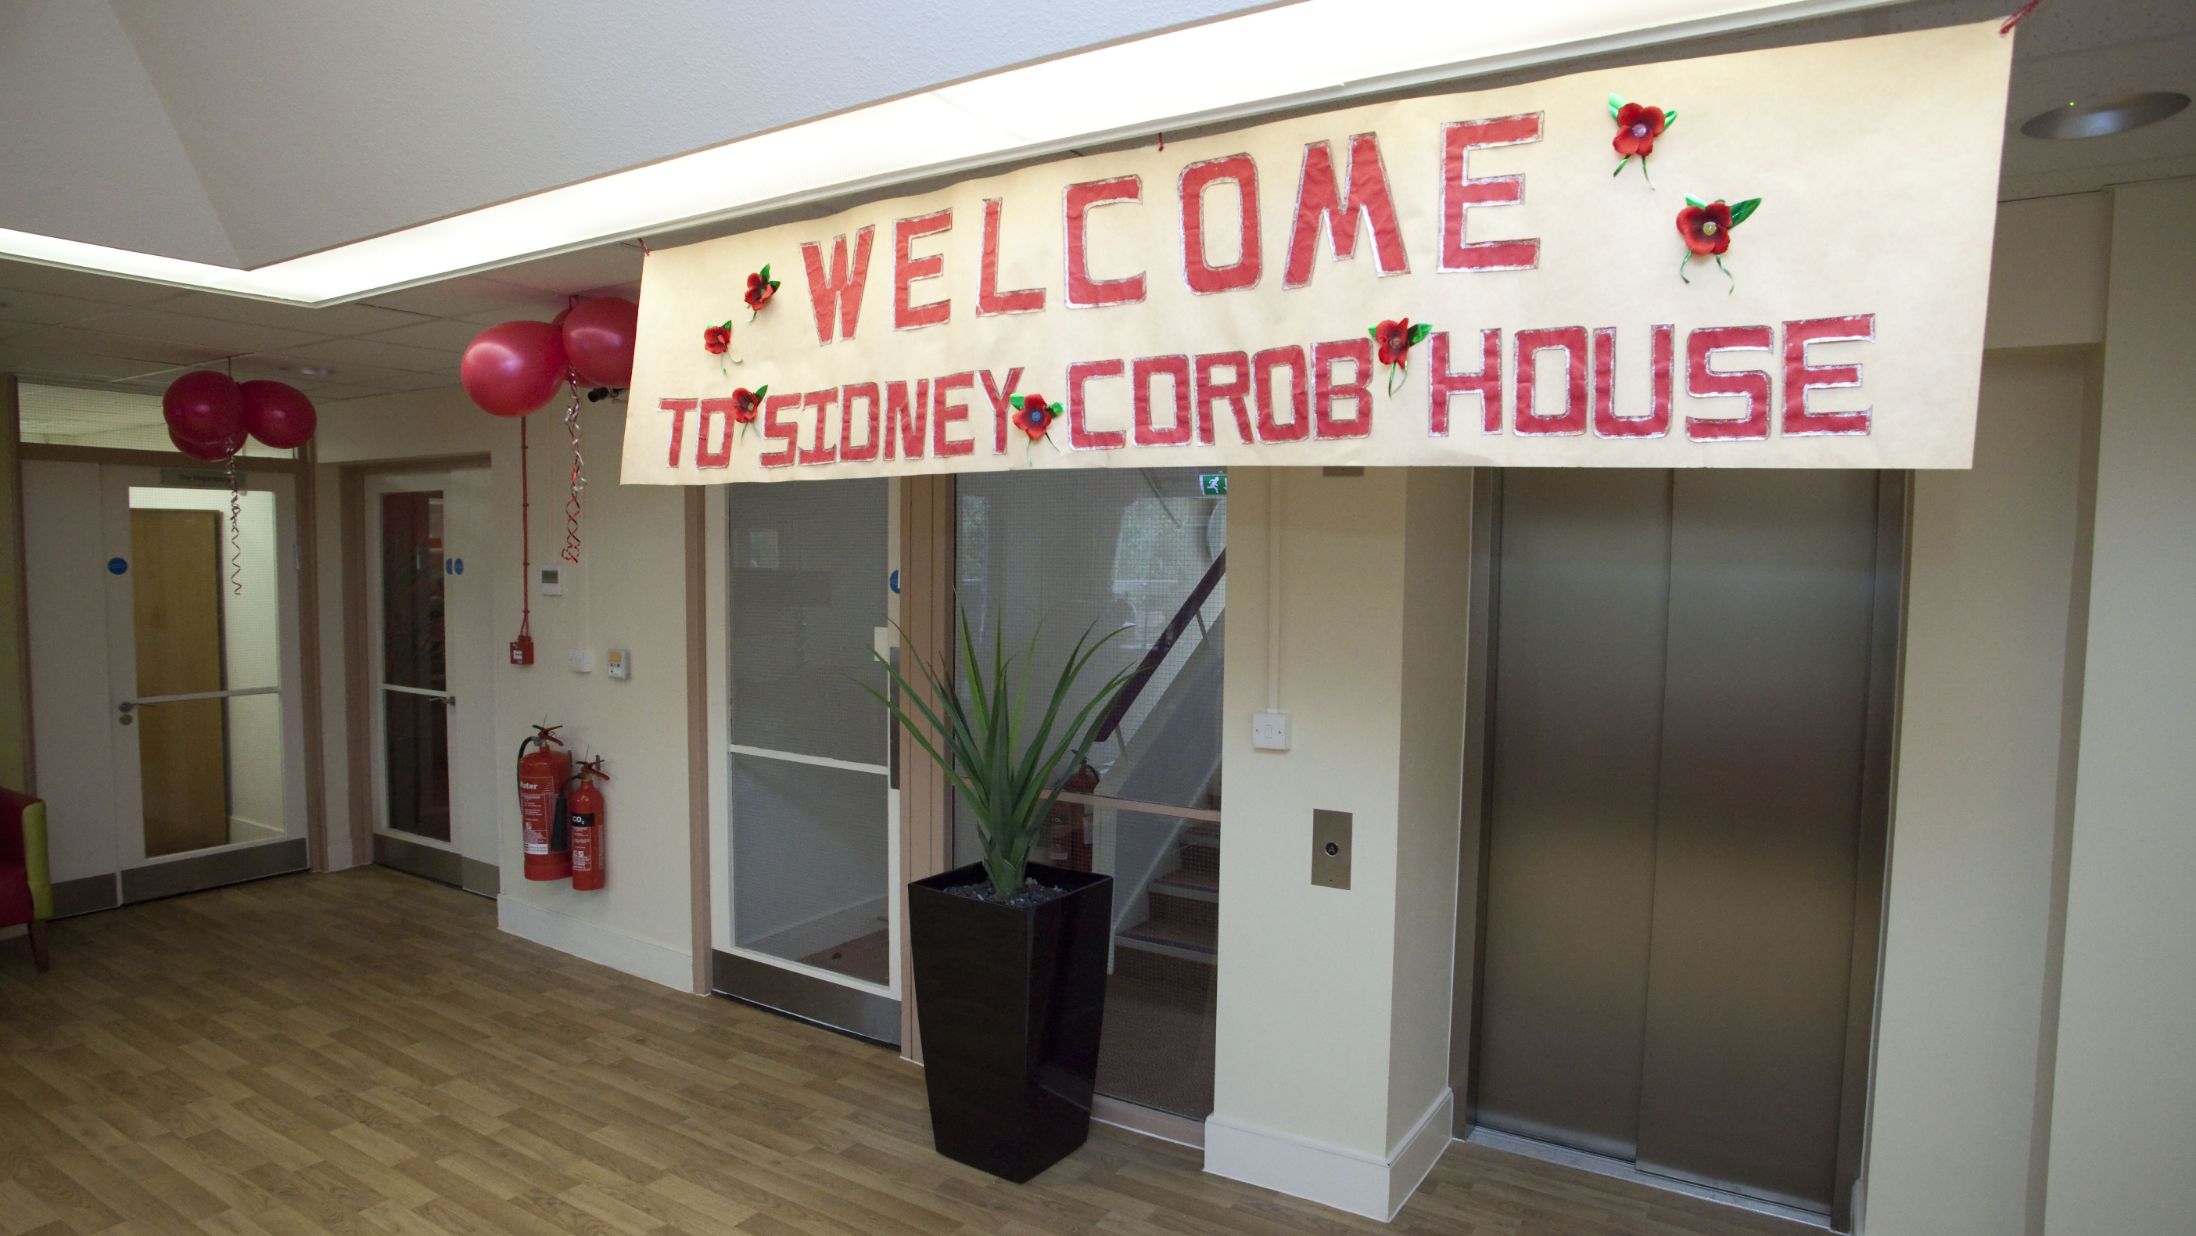 Sidney Corob House care home welcome banner